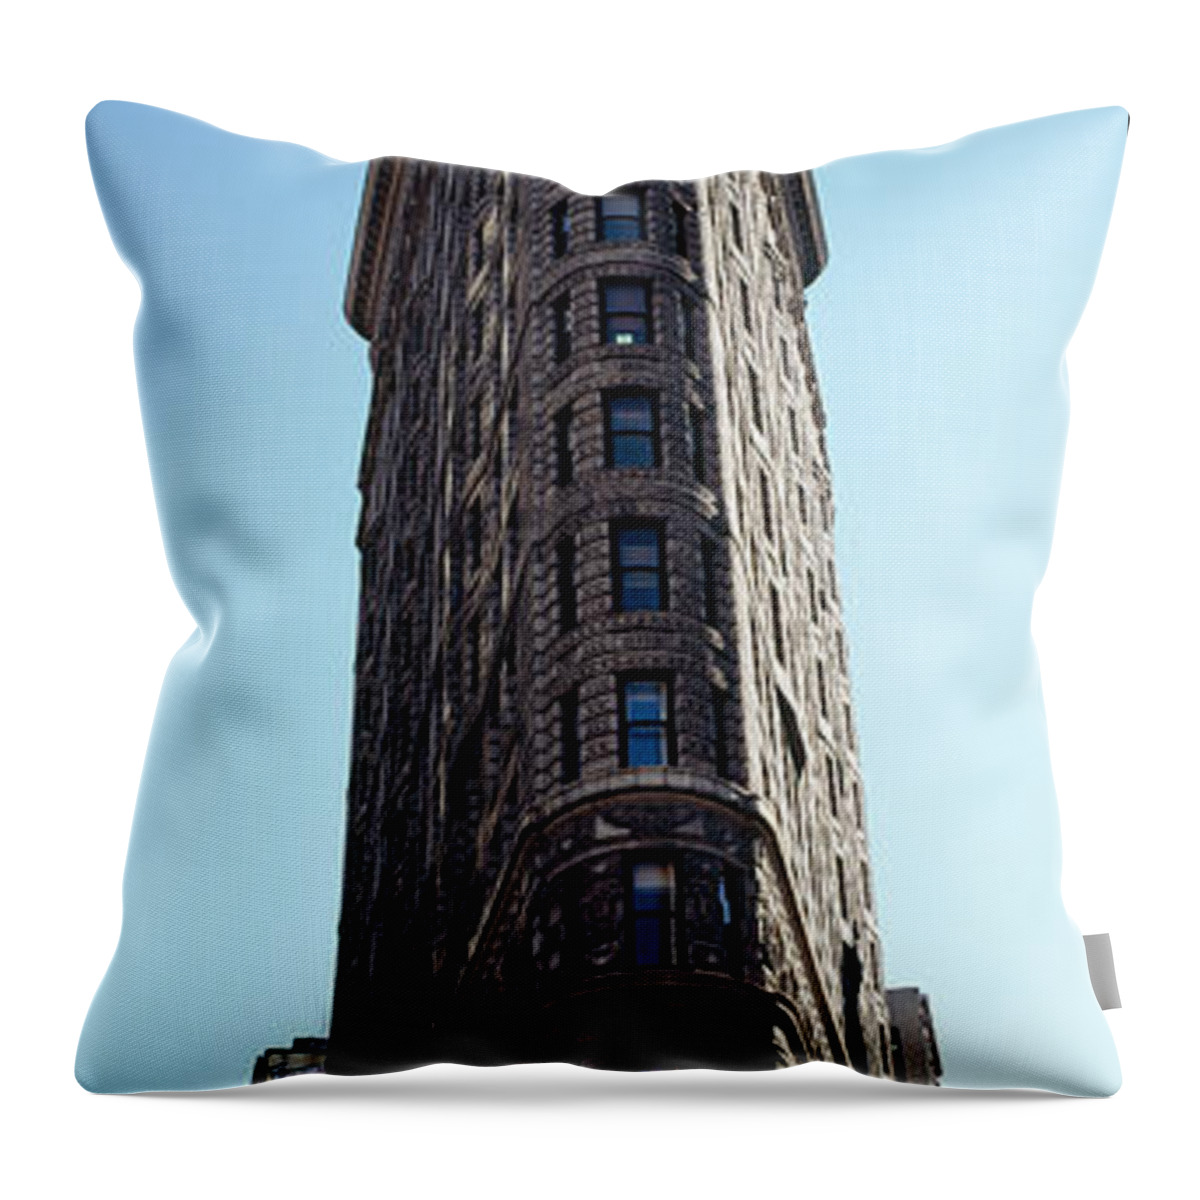 Photography Throw Pillow featuring the photograph Low Angle View Of An Office Building by Panoramic Images